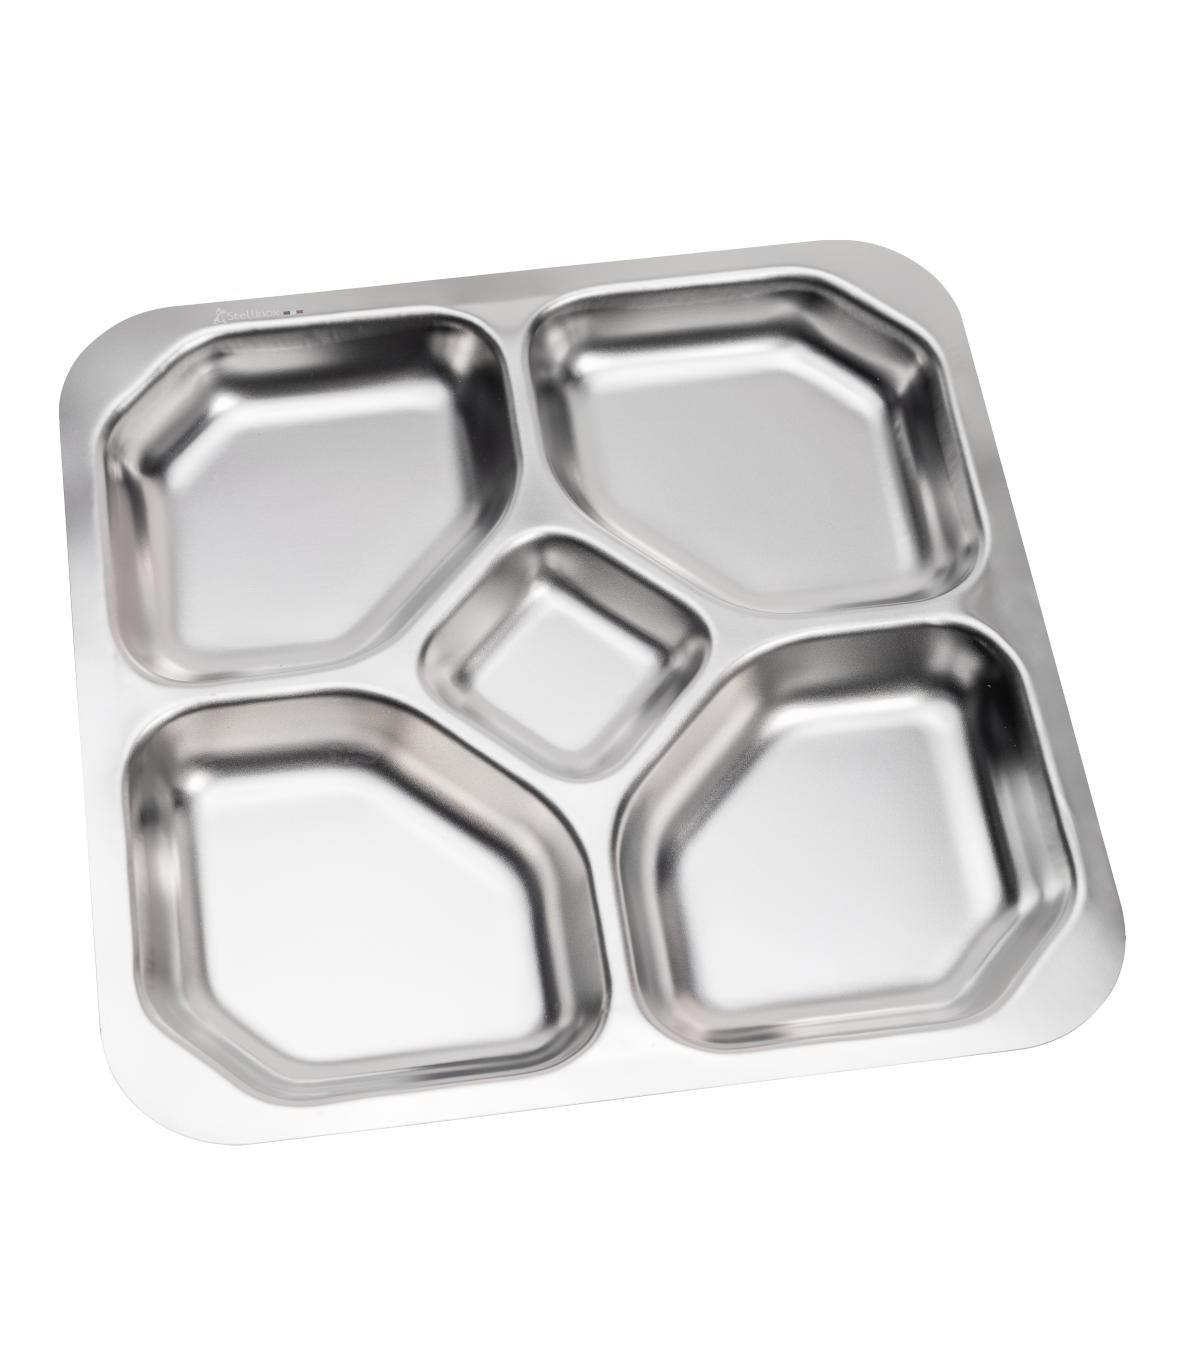 https://www.stellinox.com/6278-superlarge_default/stainless-steel-tray-with-5-compartments-265-x-265-cm-flat-edge-rounded-corners.jpg